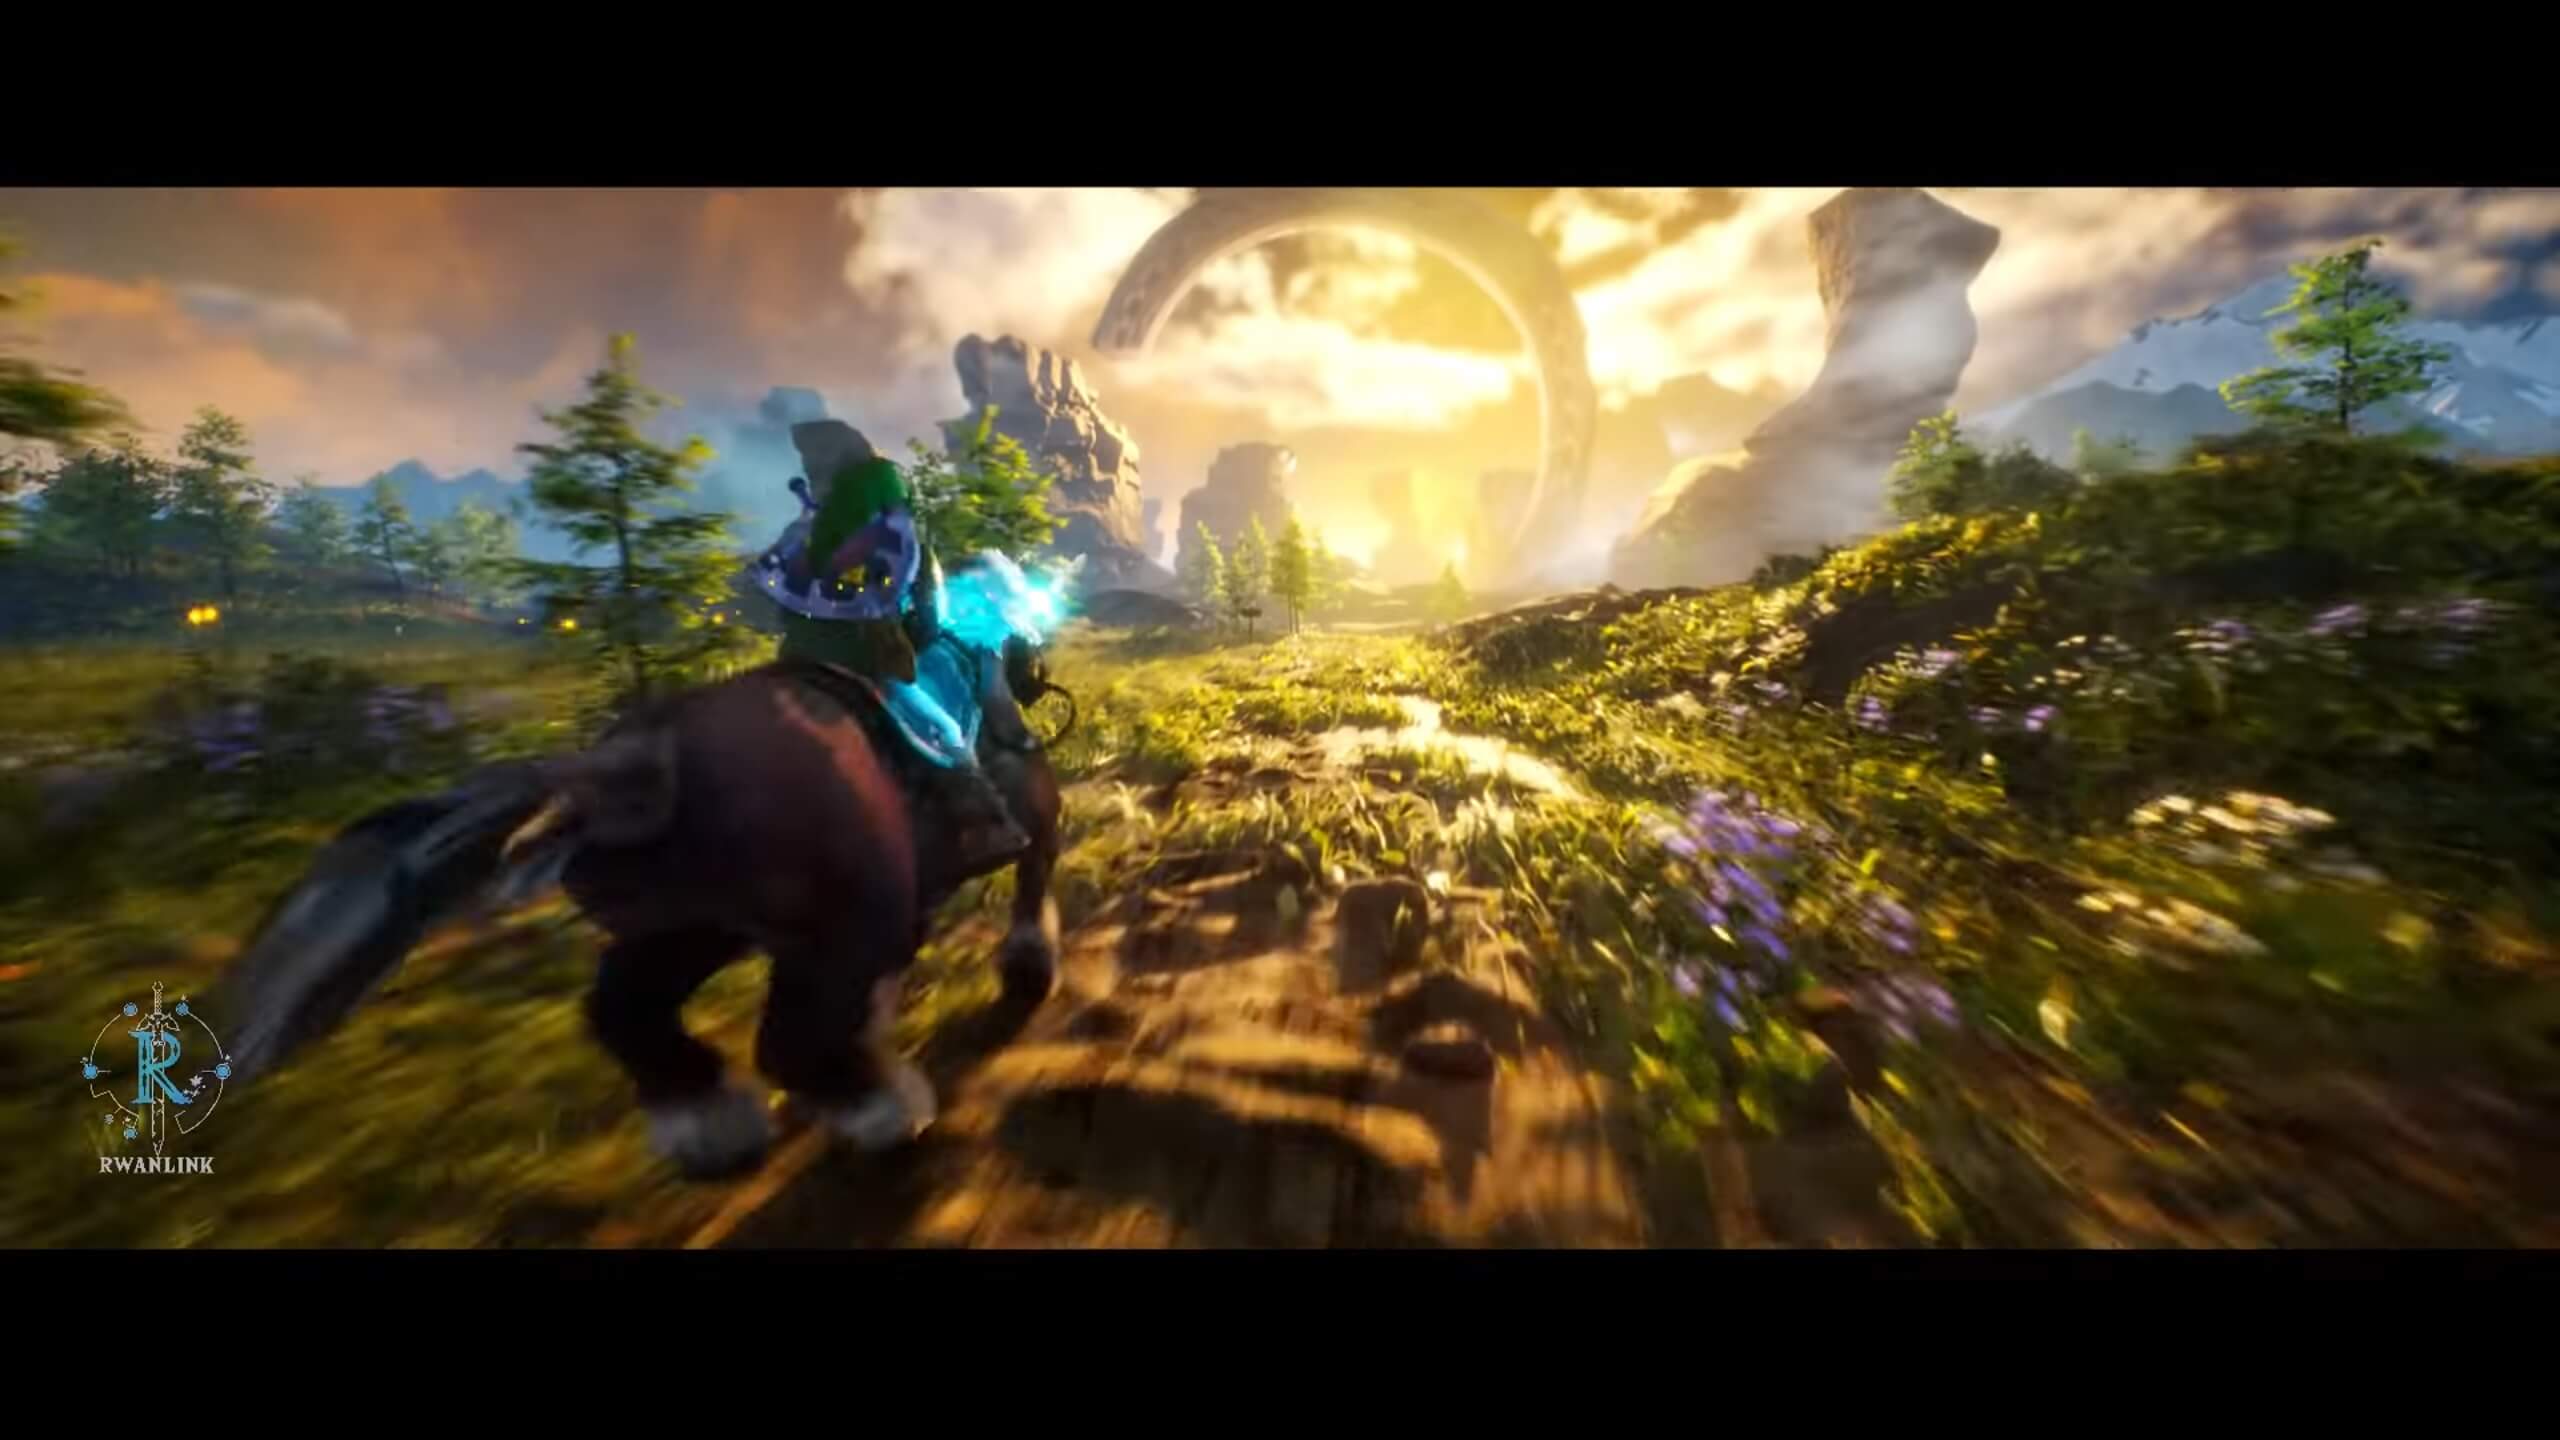 Gamer Has Remade Zelda Ocarina of Time in Unreal Engine and It Is Beautiful